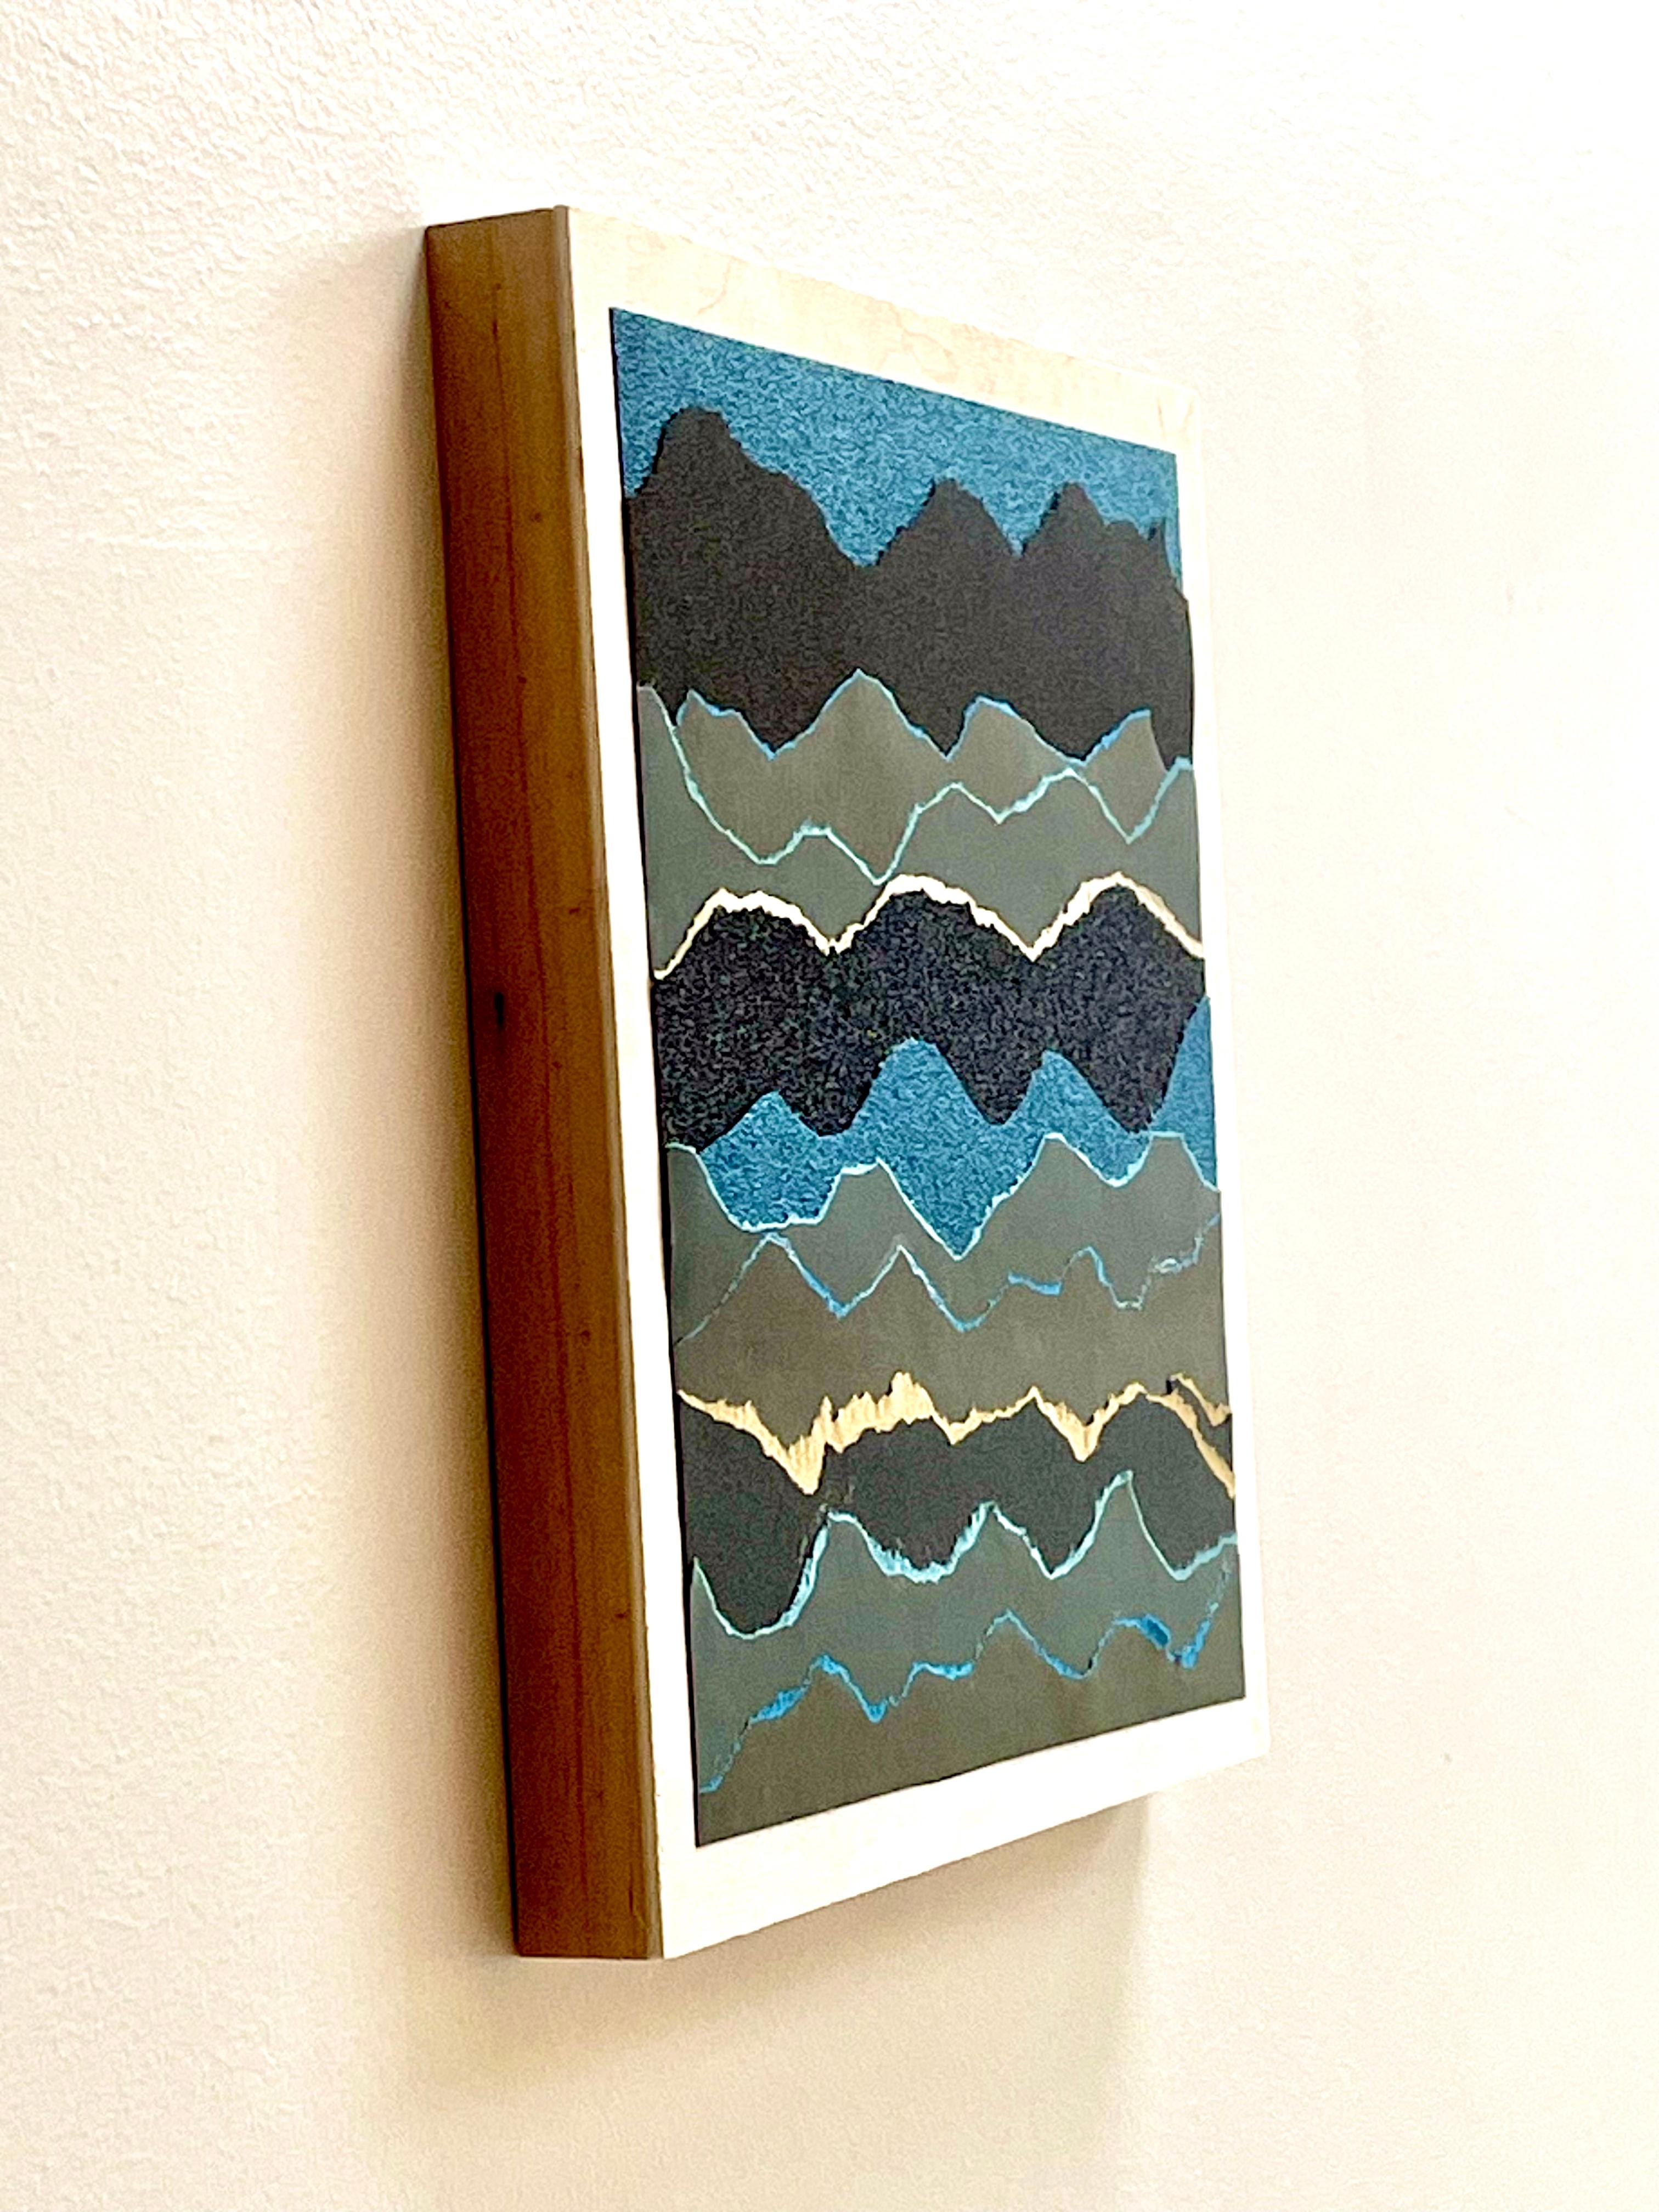 Fluctus 3  - Blue grey black abstract seascape paper collage on wood board - Art by Marie Laforey